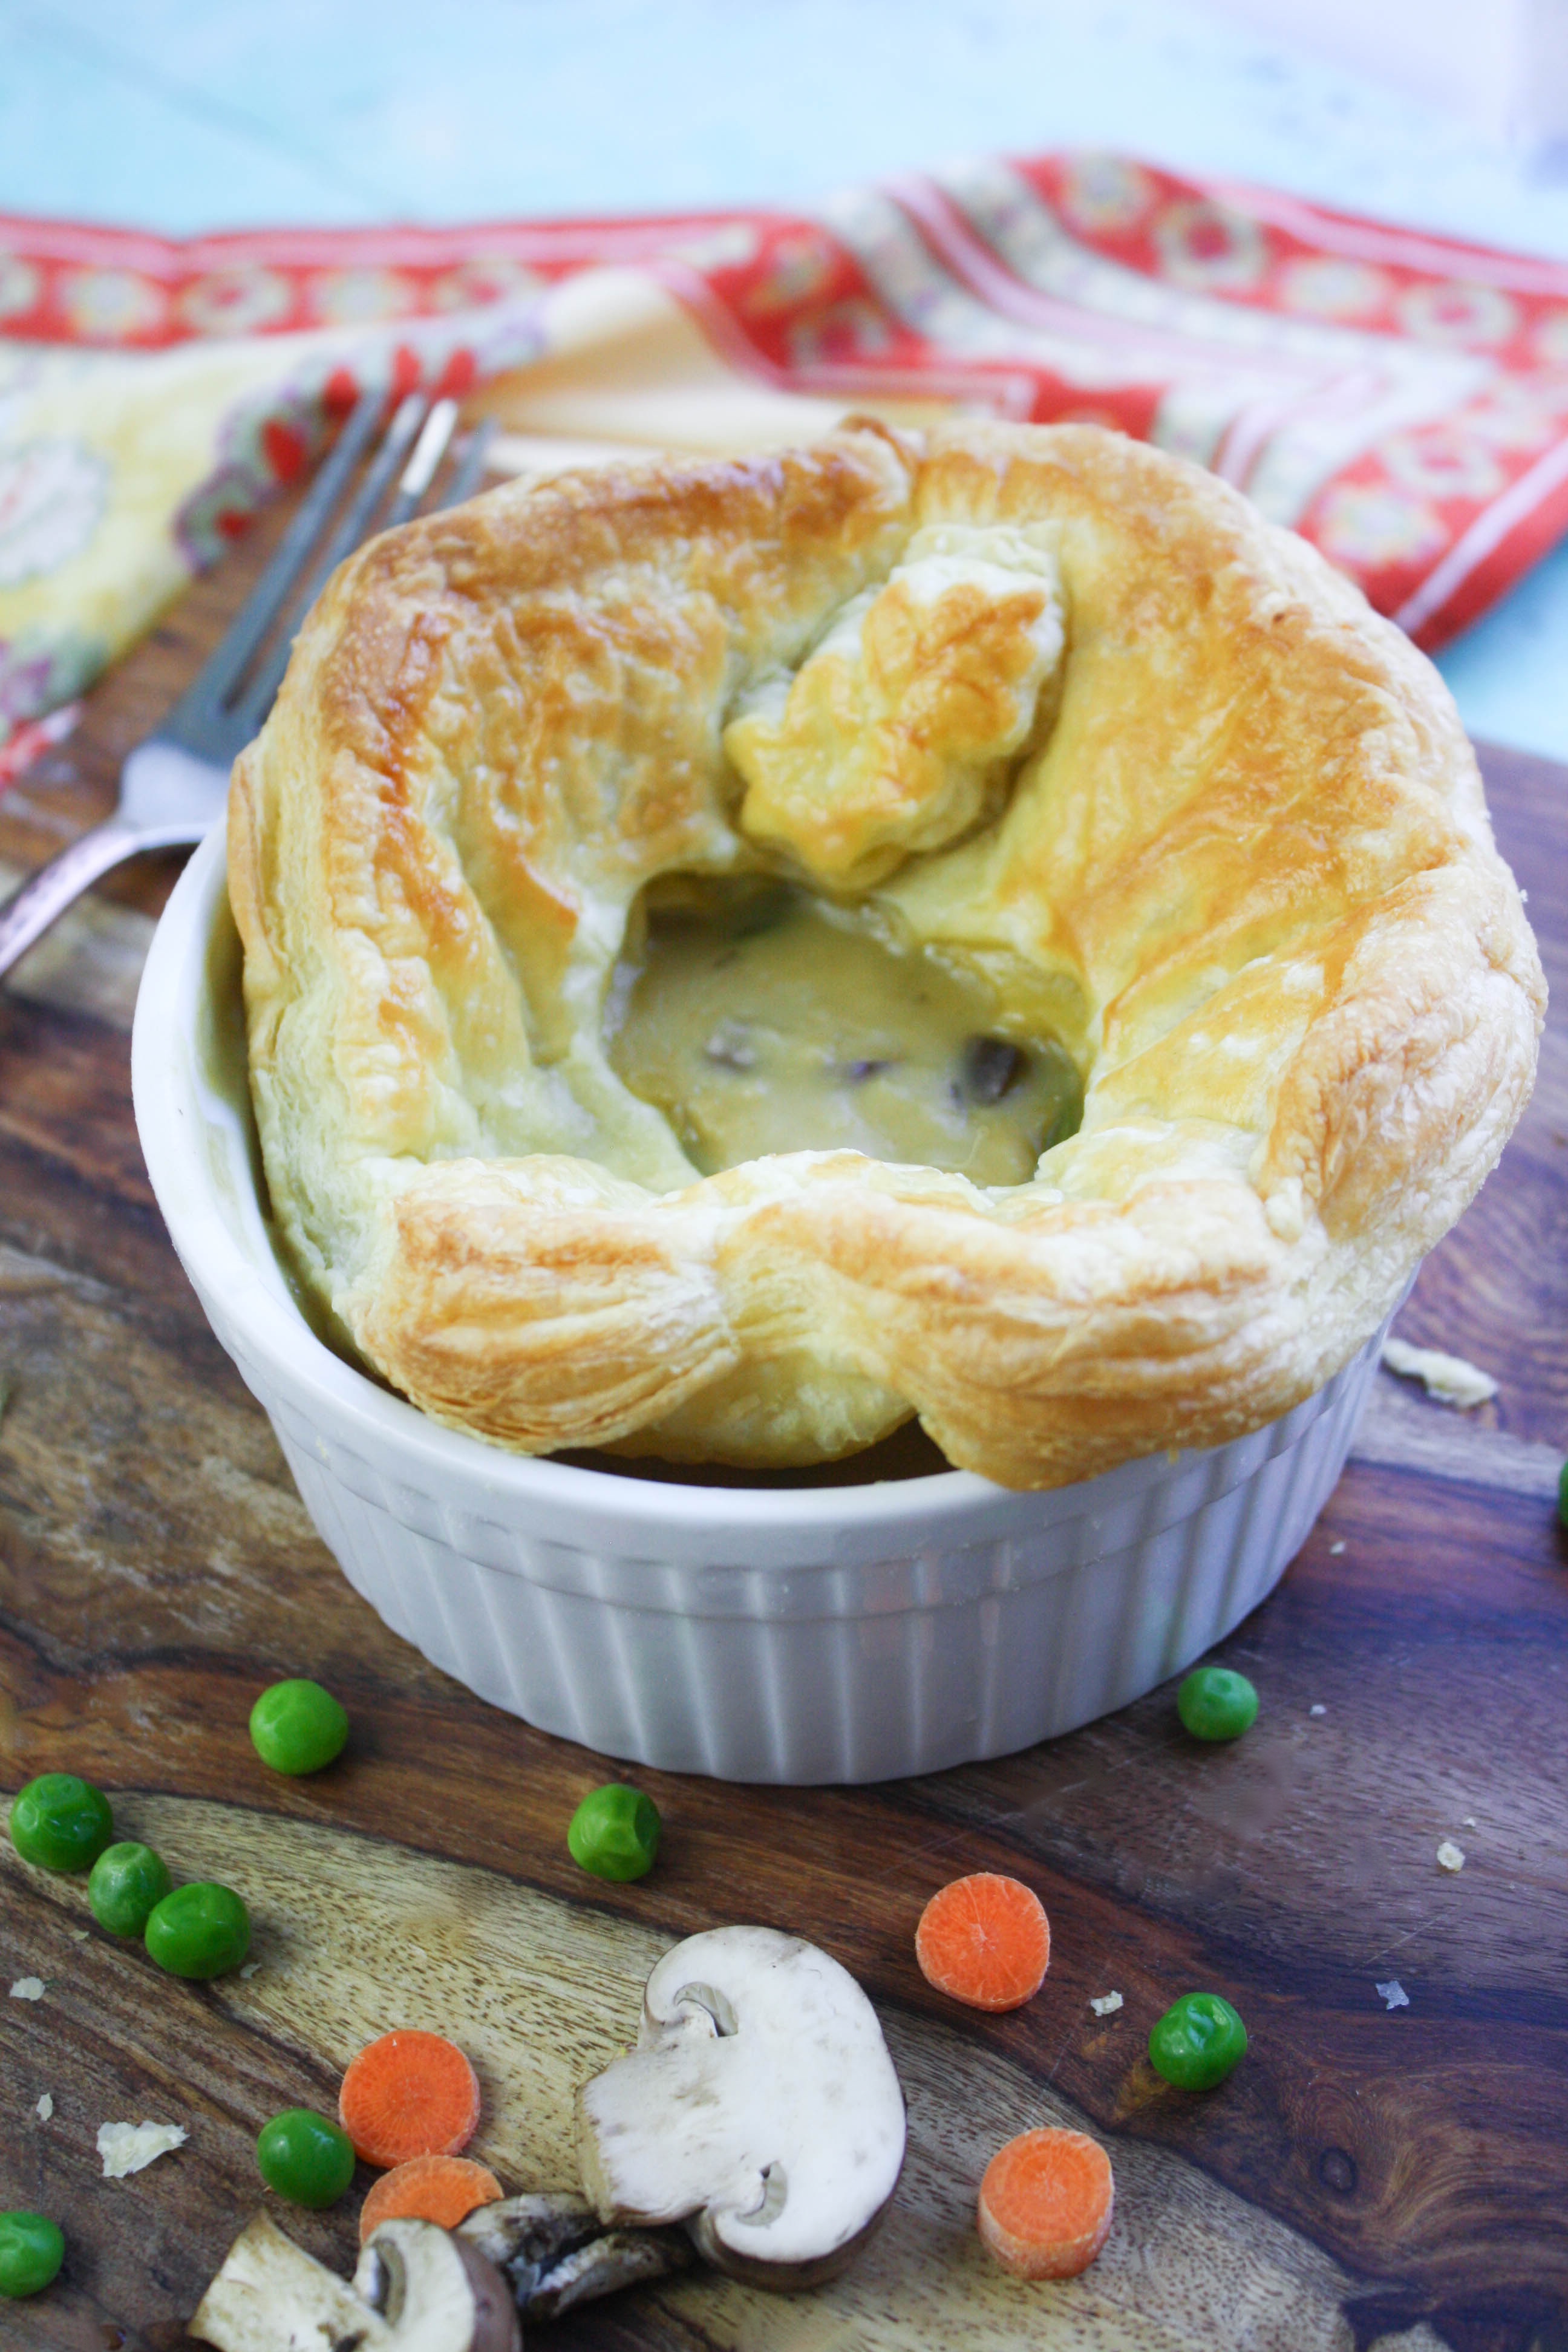 Easy Puffy Pastry Vegetable Pot Pies will make your family smile! Easy Puffy Pastry Vegetable Pot Pies are super tasty and fun any night of the week.